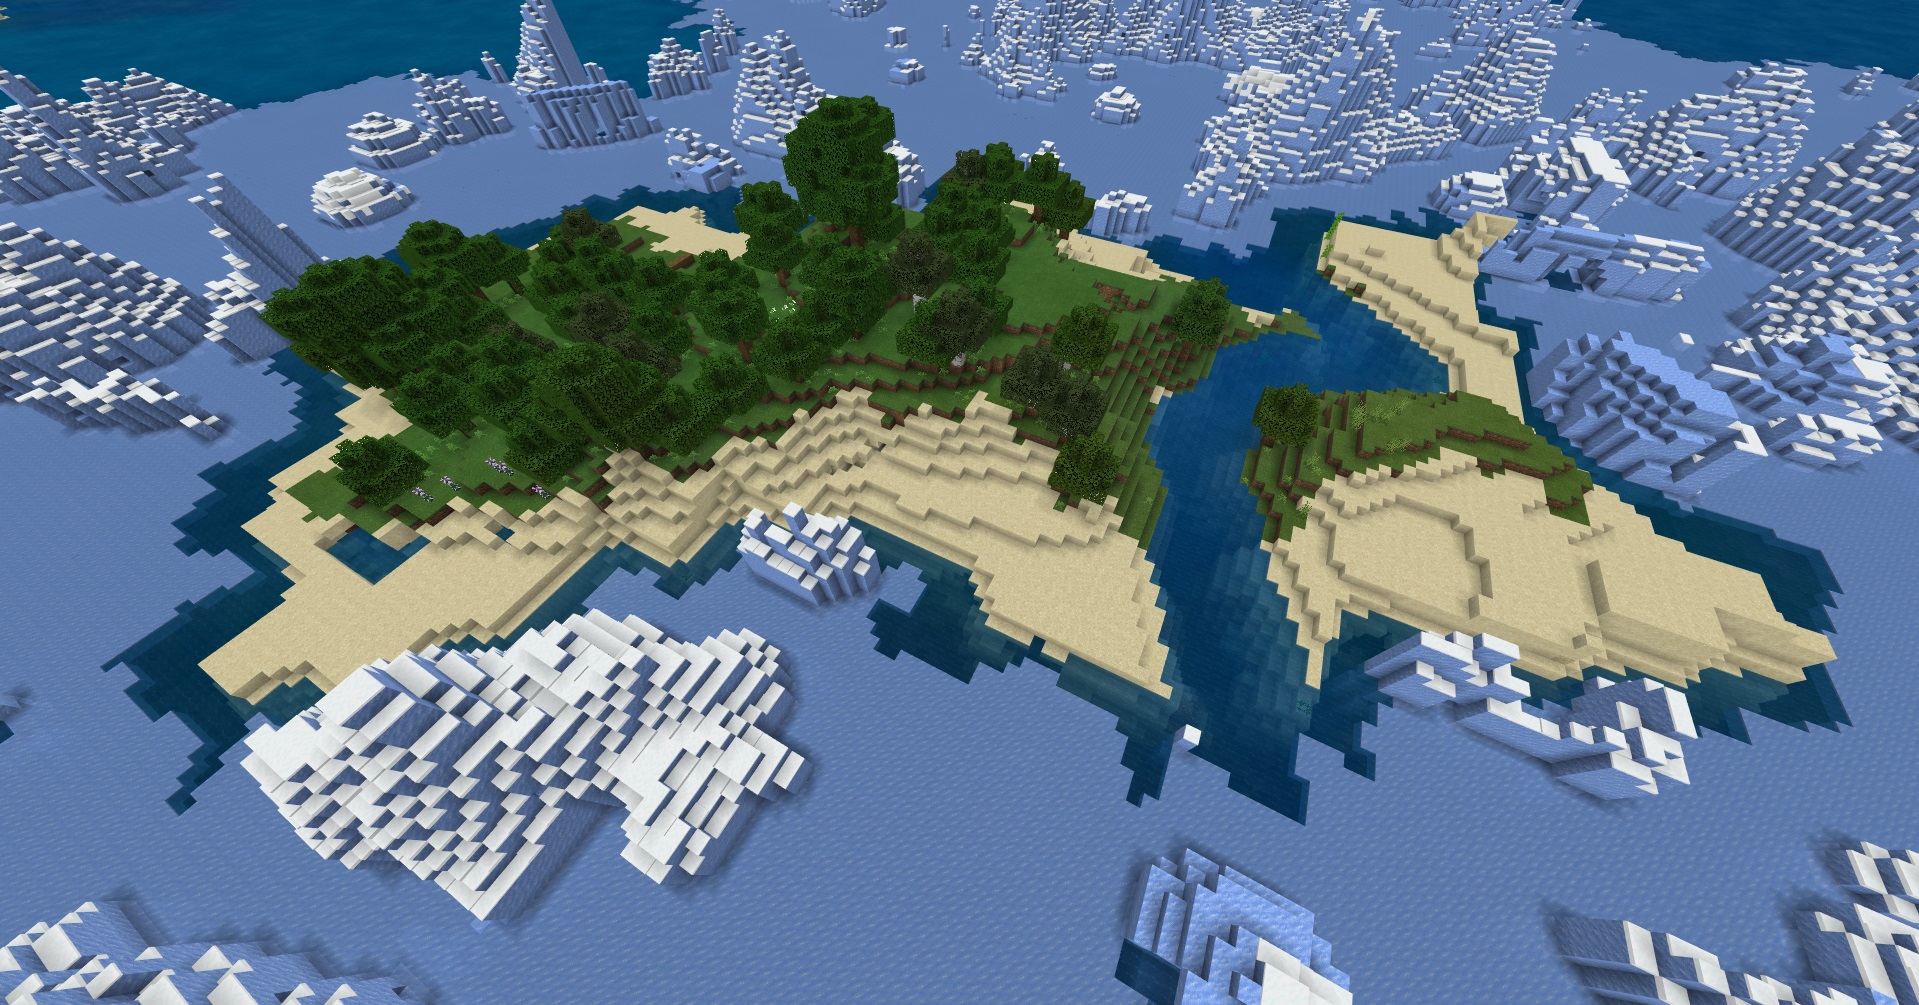 Minecraft seed bedrock and pocket edition - An aerial view of a medium-sized island with a small forest and beaches surrounded by an icy ocean tundra